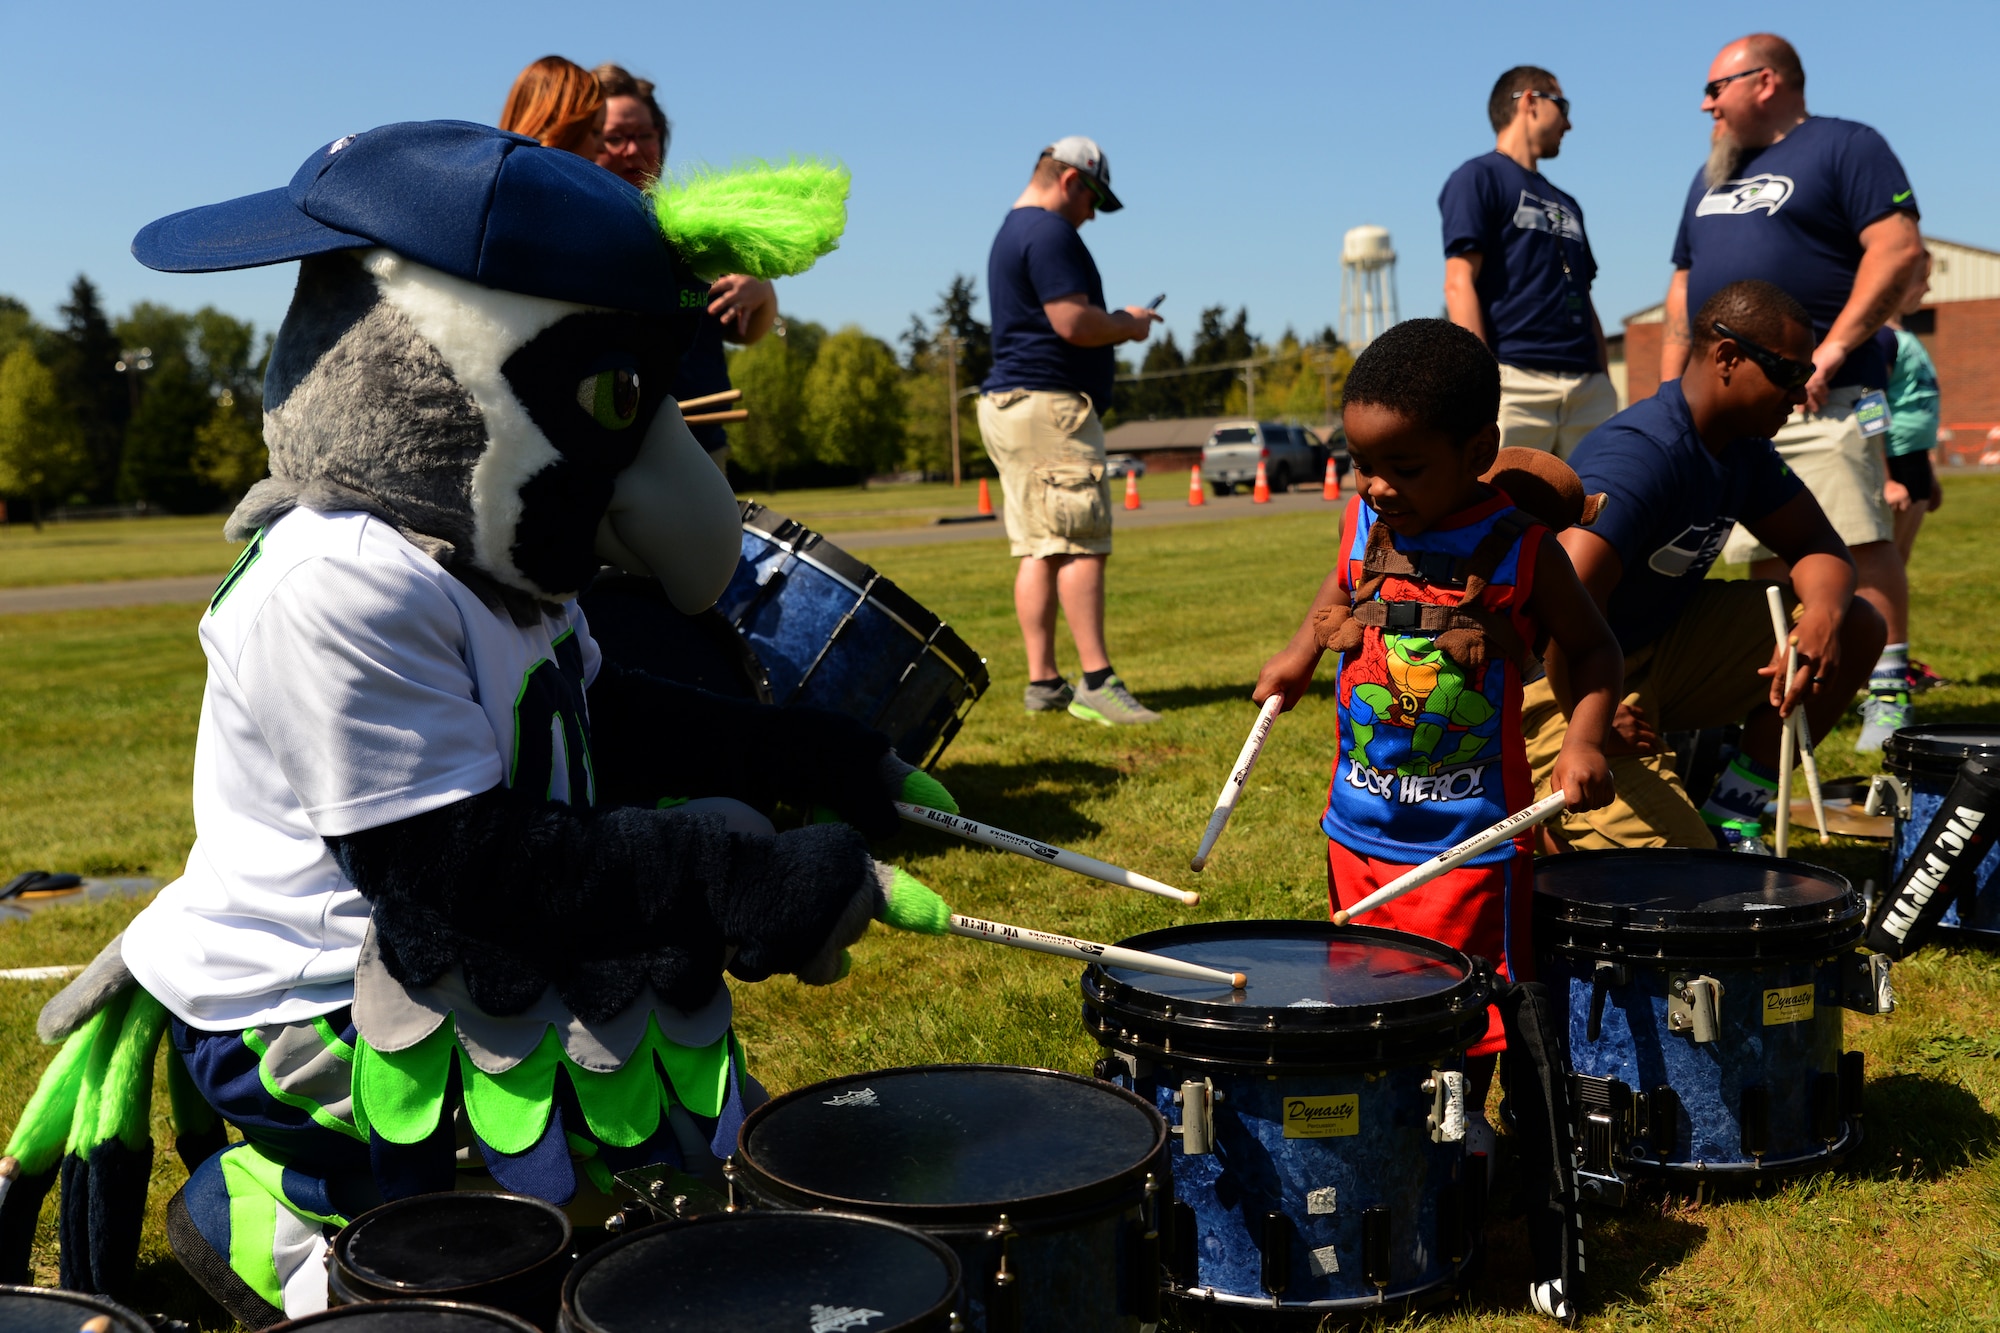 Seattle Seahawks mascot Boom plays drums with event goers at the Seahawks draft day event on Joint Base Lewis-McChord, Wash., May 2, 2015. The event featured service members announcing Seahawks draft picks and several forms of entertainment such as armchair quarterback, shuffle board, pool tables, a football toss and kick game, photos with the 2013 Lombardi and 2014 National Football Conference championship trophies, video gaming, autographs from eight different Seahawk players, free food and drink and numerous military statics from across the Sound. (U.S. Air Force photo\ Staff Sgt. Tim Chacon) 